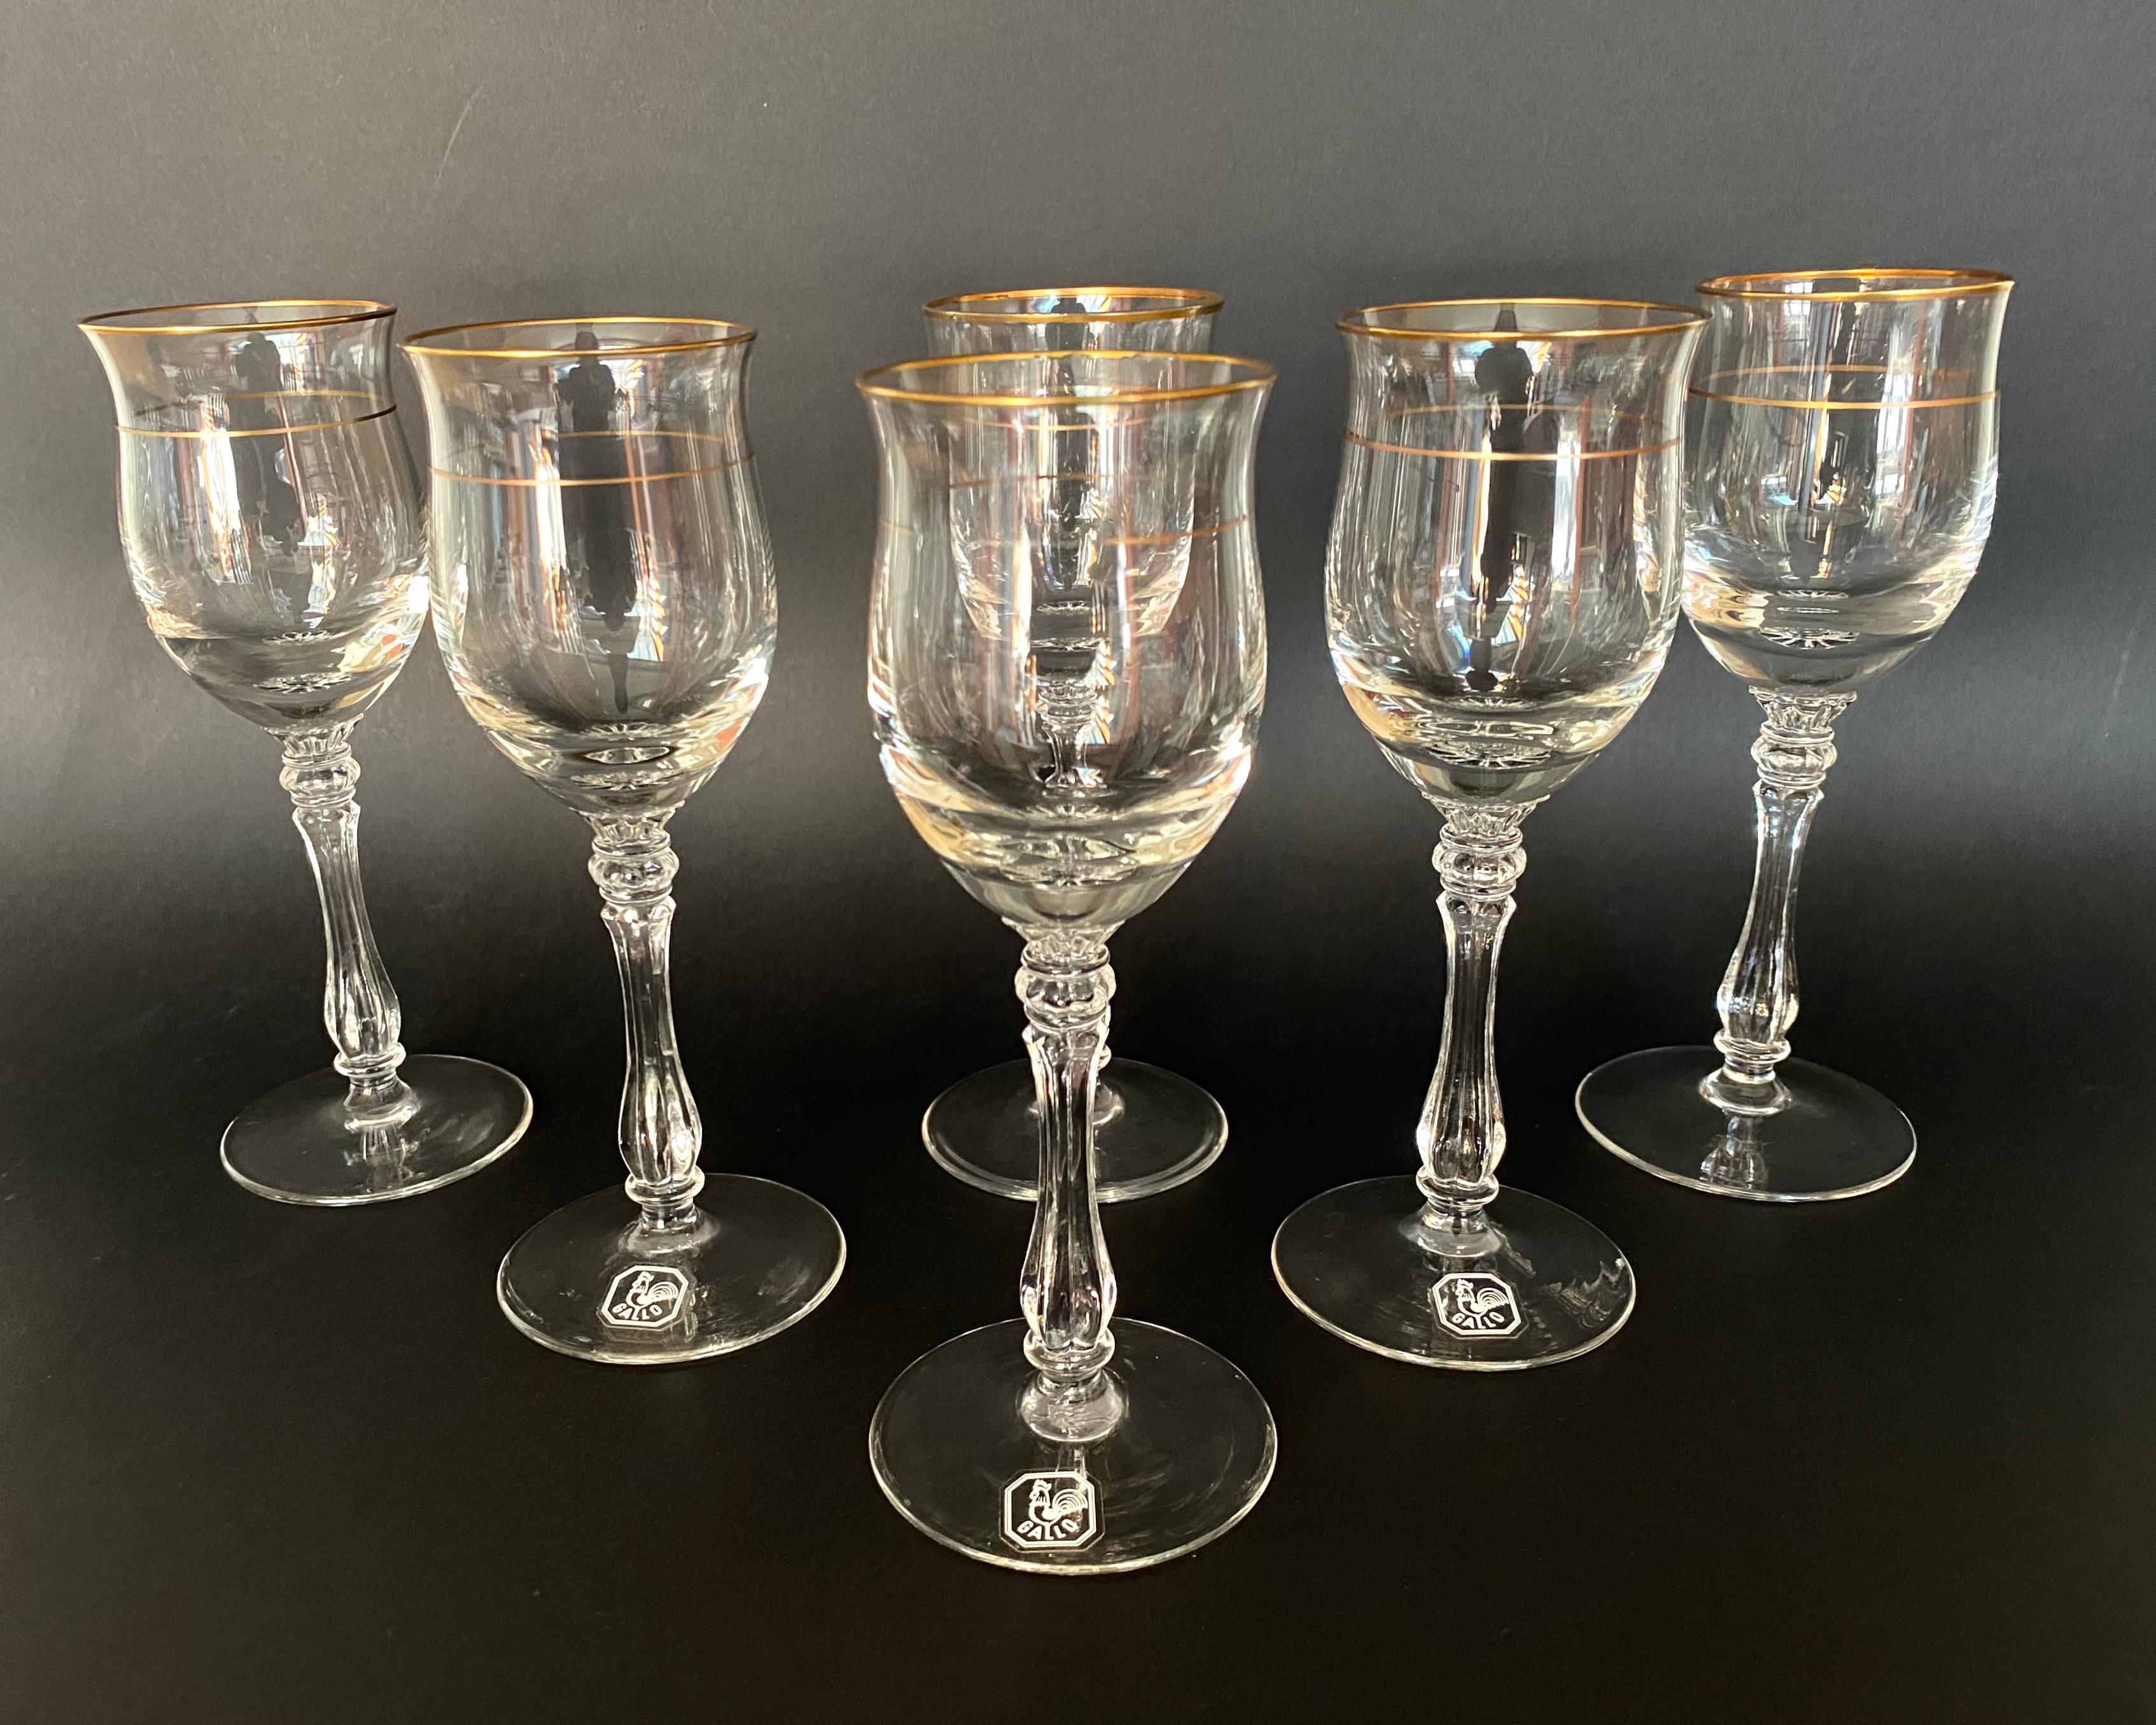 Charming Vintage Set of 6 Crystal Cognac Glasses by Gallo, Germany, 1970s In Excellent Condition For Sale In Bastogne, BE